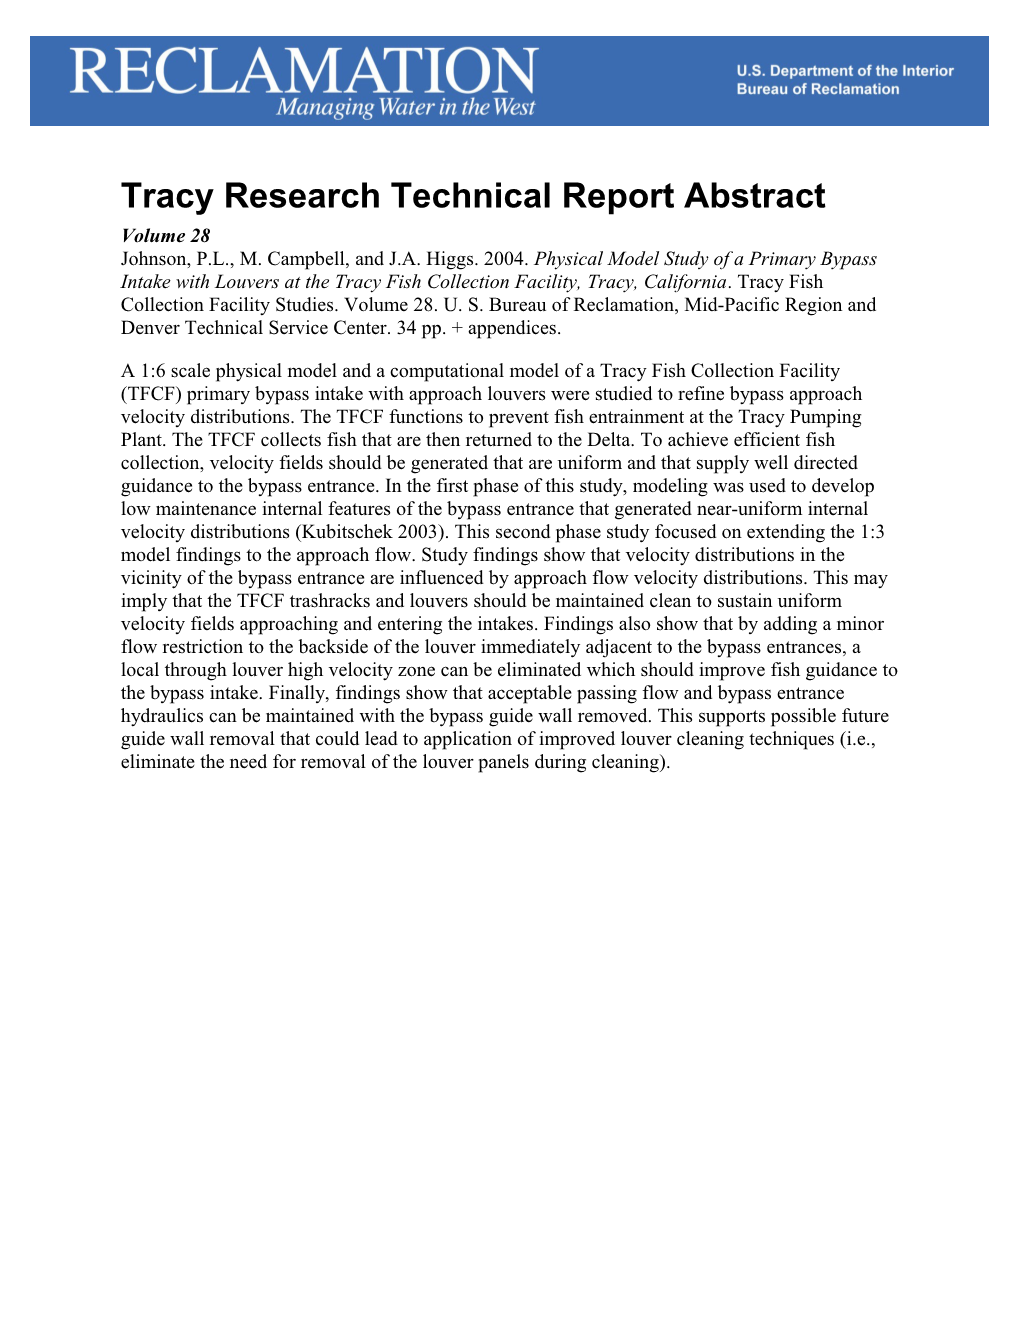 Tracy Research Tech Report Abstract Vol. 28